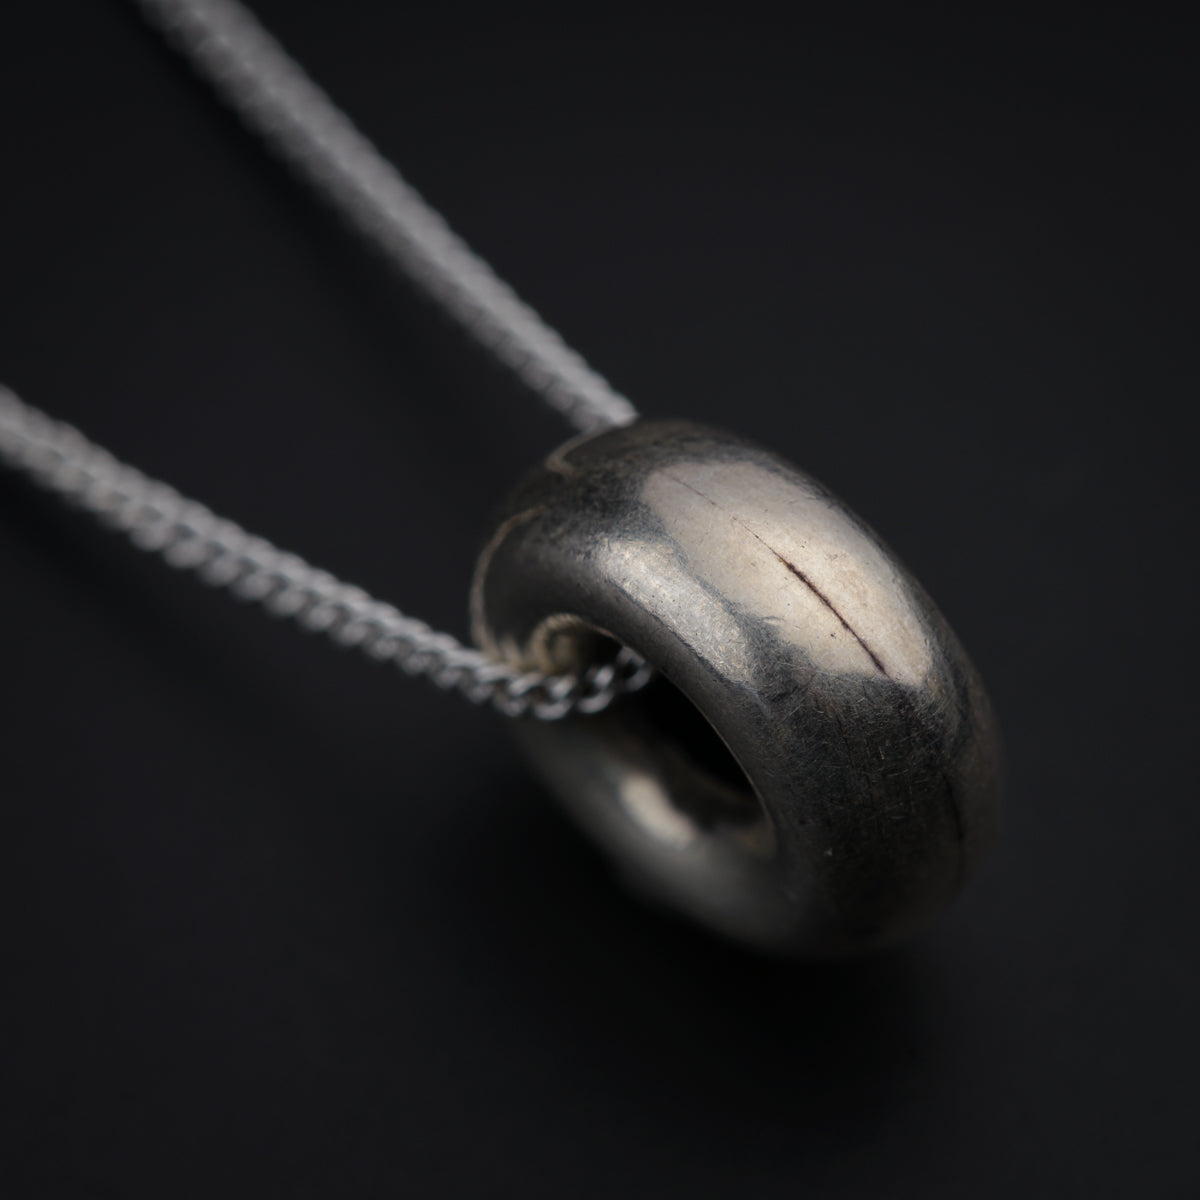 a close up of a metal object on a chain